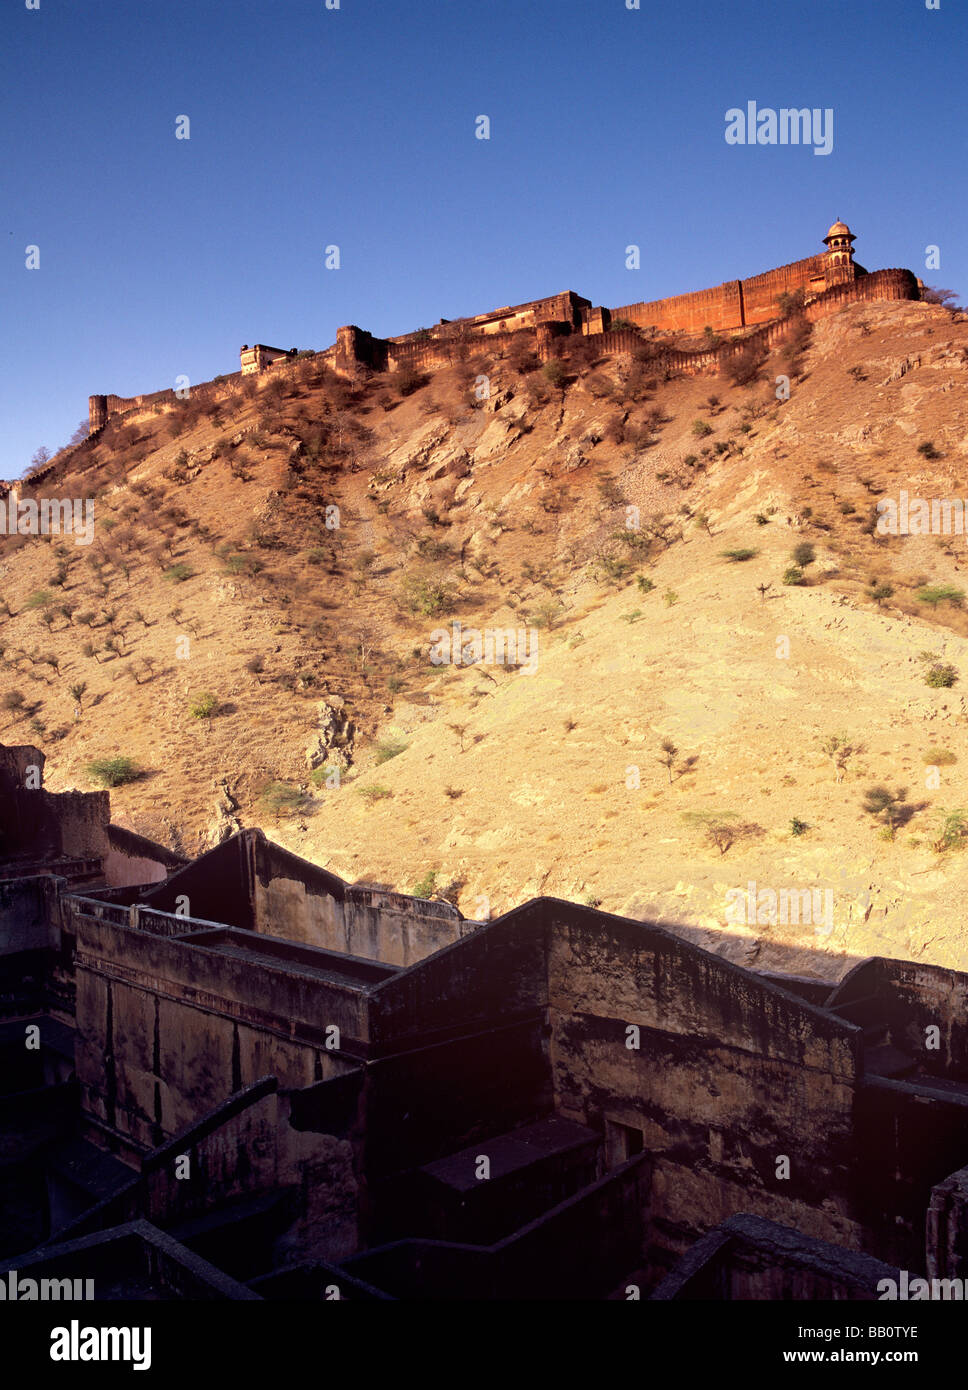 View across Amber Fort to Jaigarh Fort; Jaipur, Rajasthan, India Stock Photo